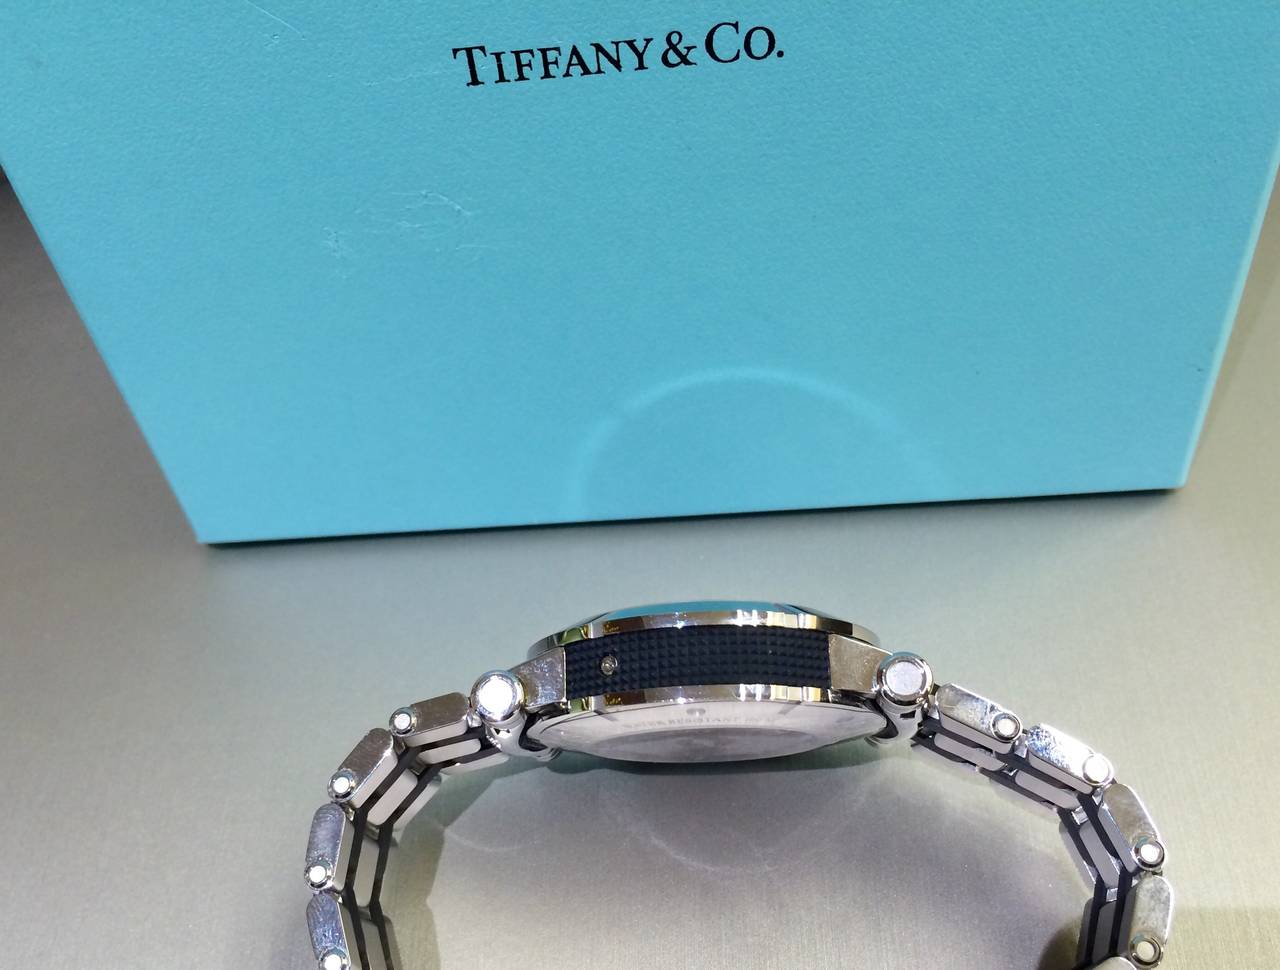 Tiffany & Co. Stainless Steel Rubber Atlas Chronograph Automatic Wristwatch 4